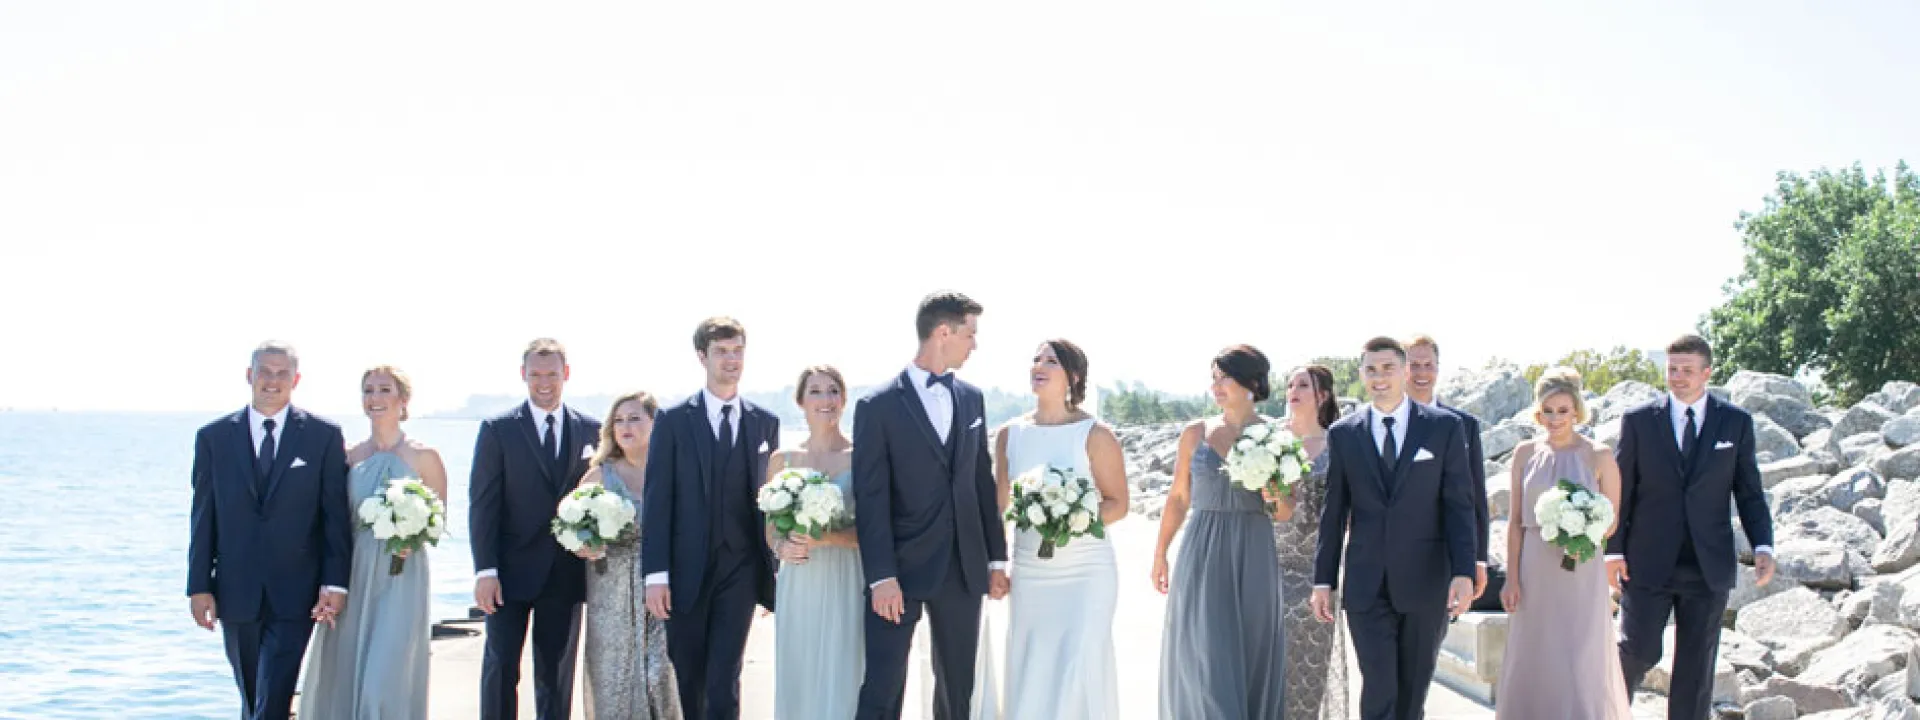 The bridal party stands along the water of Lake Michigan for their portraits